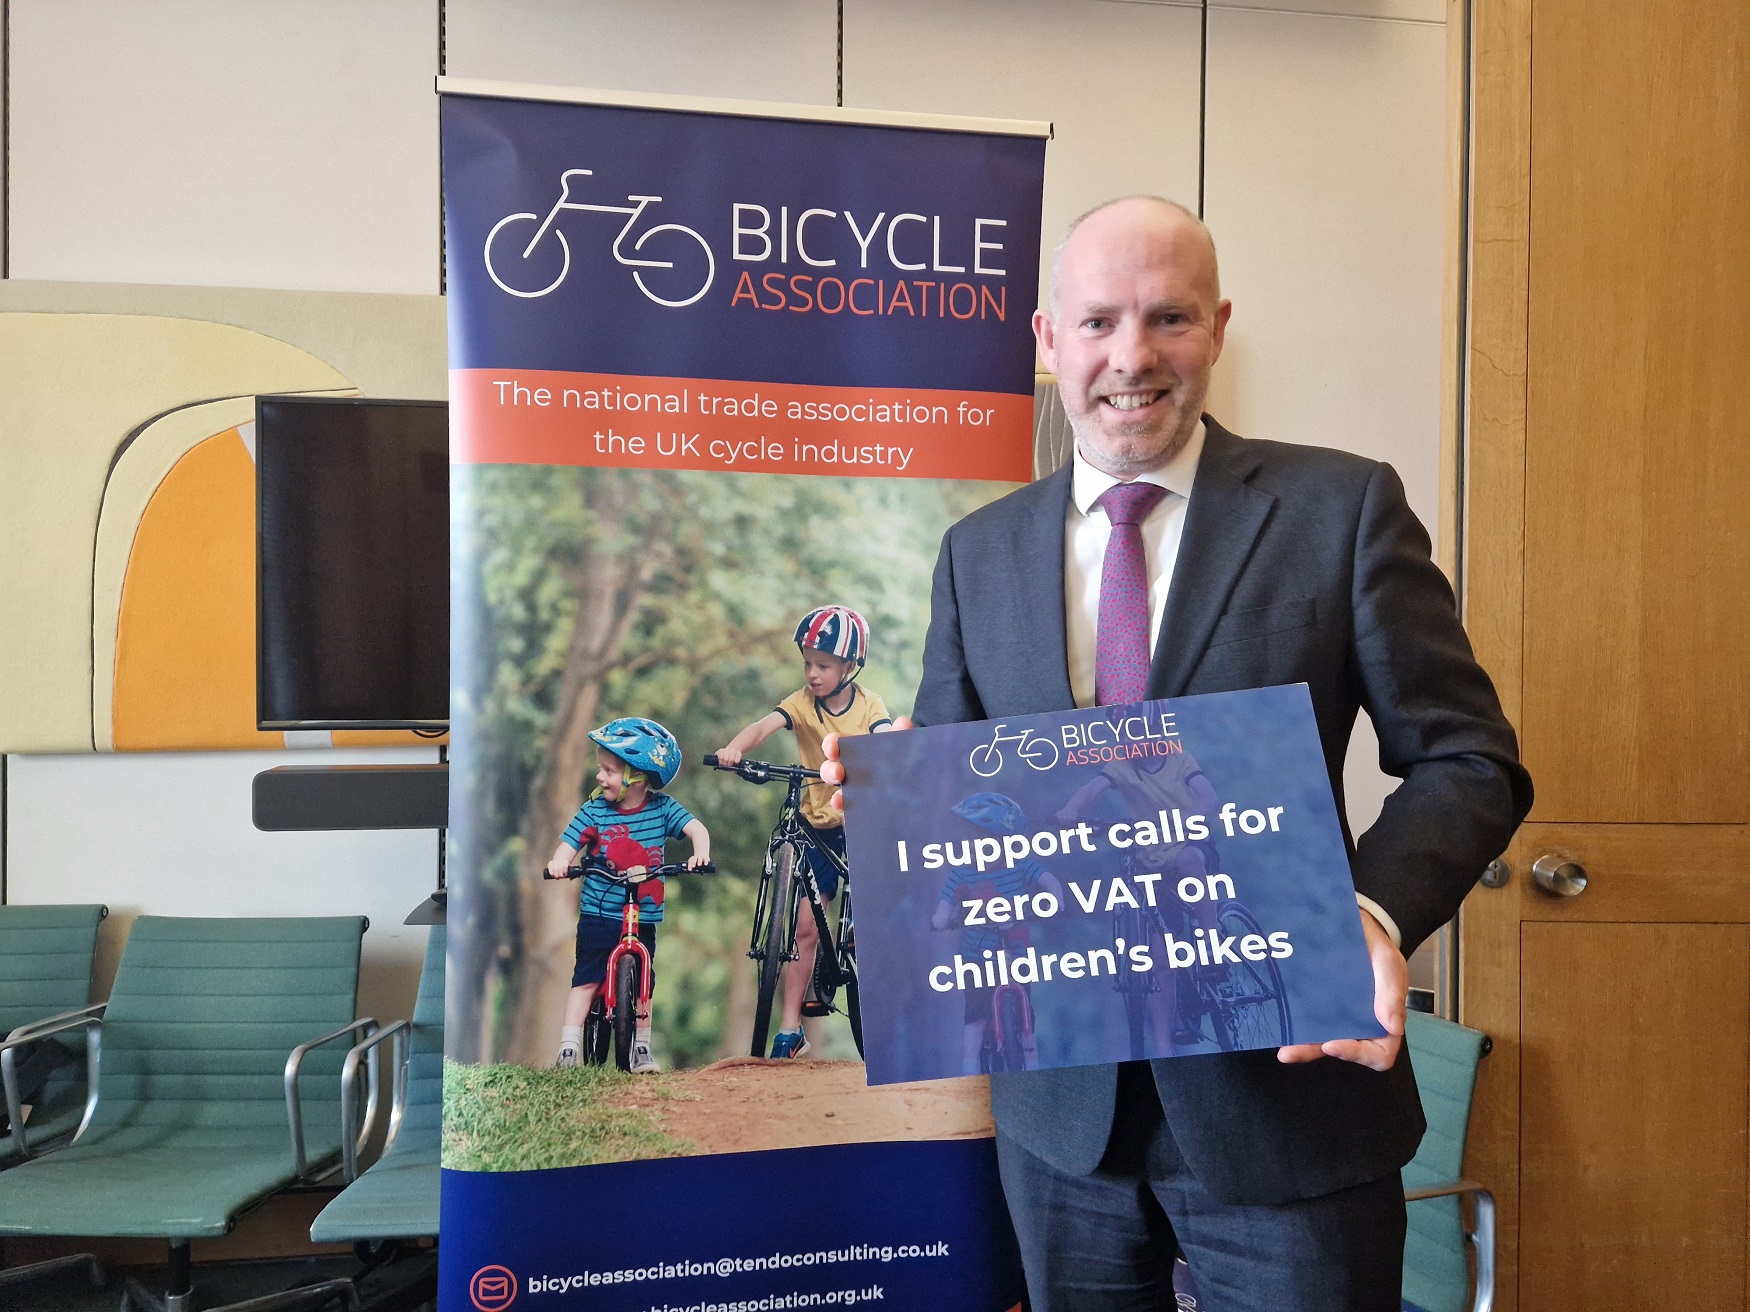 Justin Joins Bicycle Association To Get Children Cycling